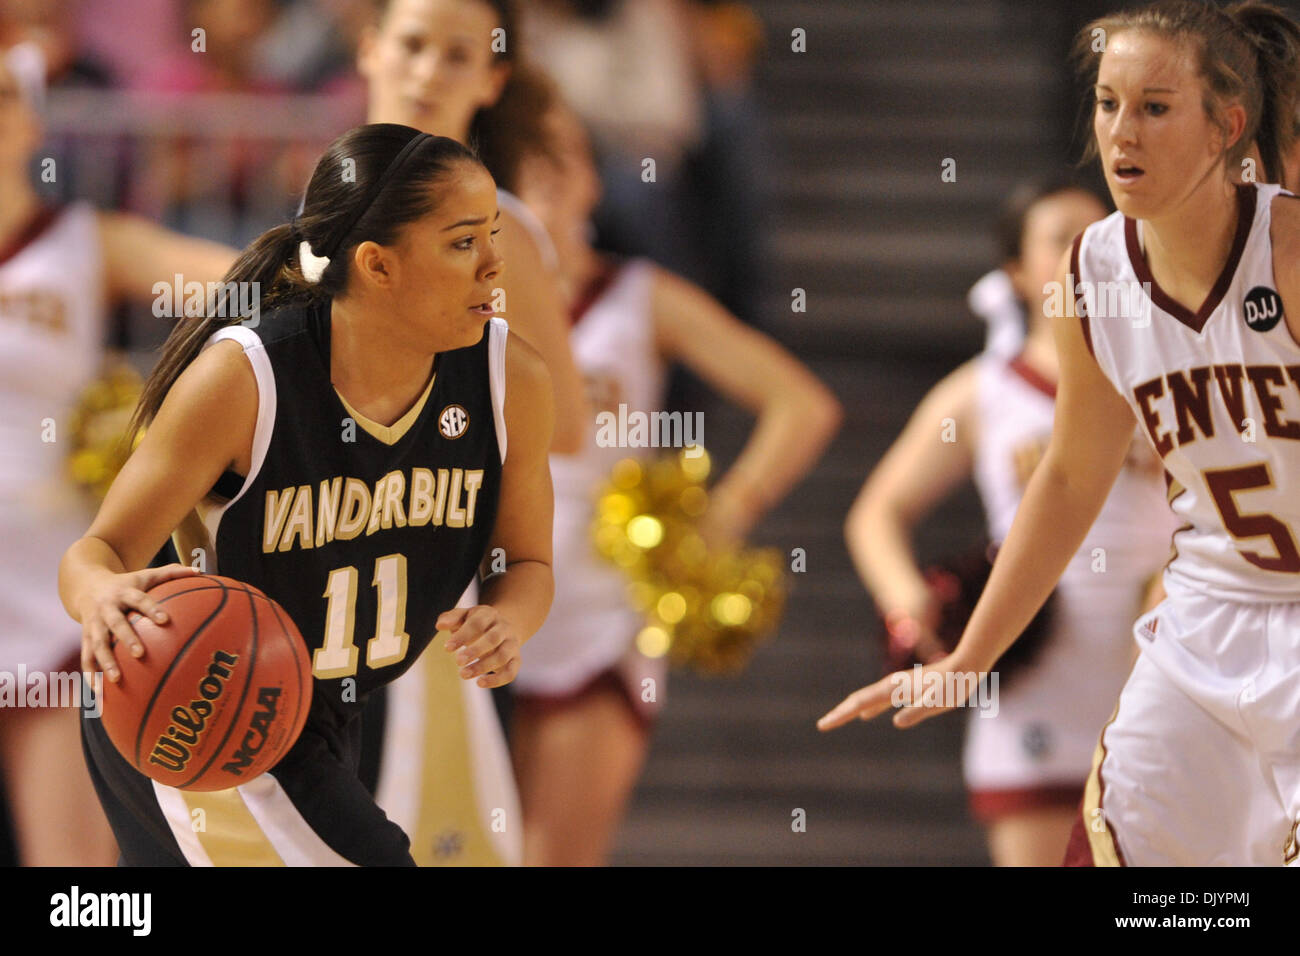 Dec. 5, 2010 - Denver, Colorado, United States of America - Vanderbilt's Jasmine Lister (11) dribbles as Denver's Britteni Rice (5) defends. The Denver Pioneers lead the #23 Vanderbilt Commodores by a score of 29-28 at the half at Magness Arena. (Credit Image: © Andrew Fielding/Southcreek Global/ZUMAPRESS.com) Stock Photo